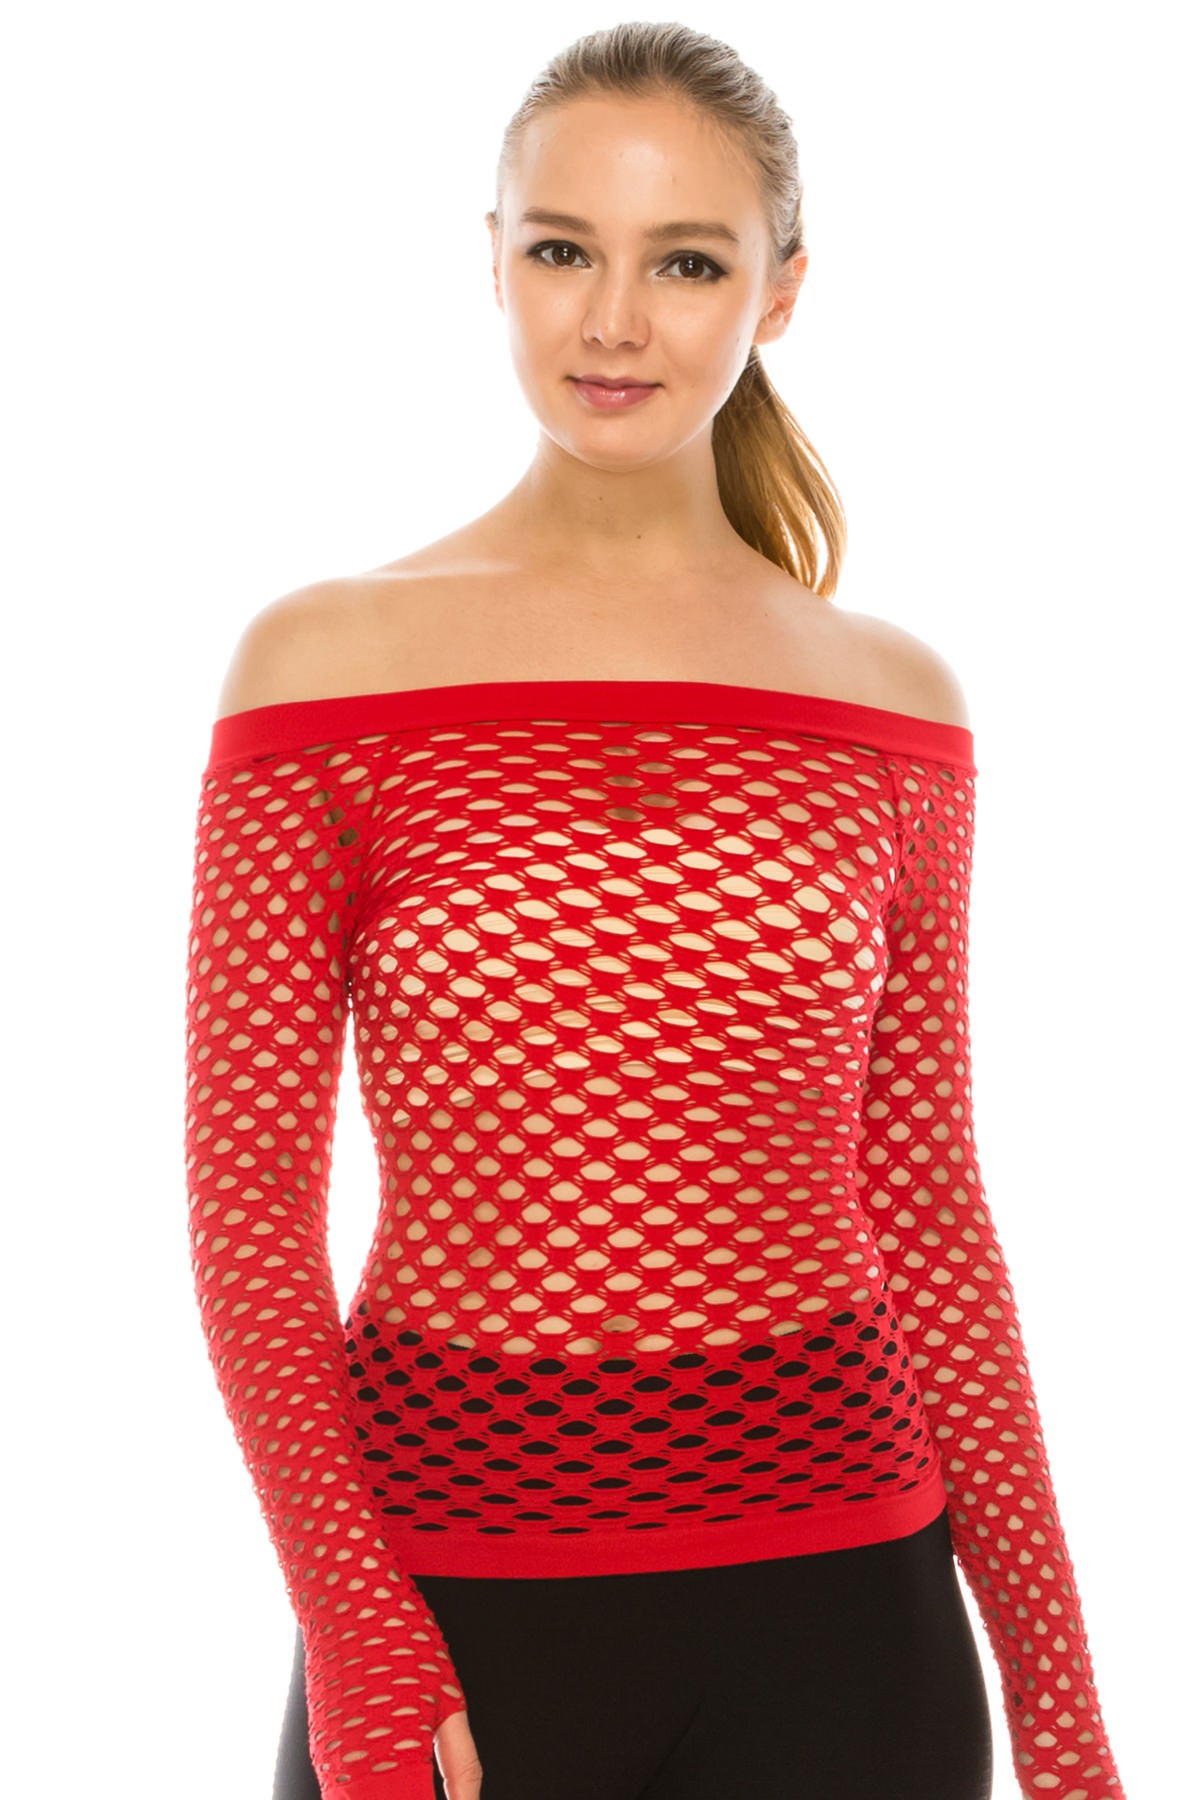 Red Fishnet Top looking up